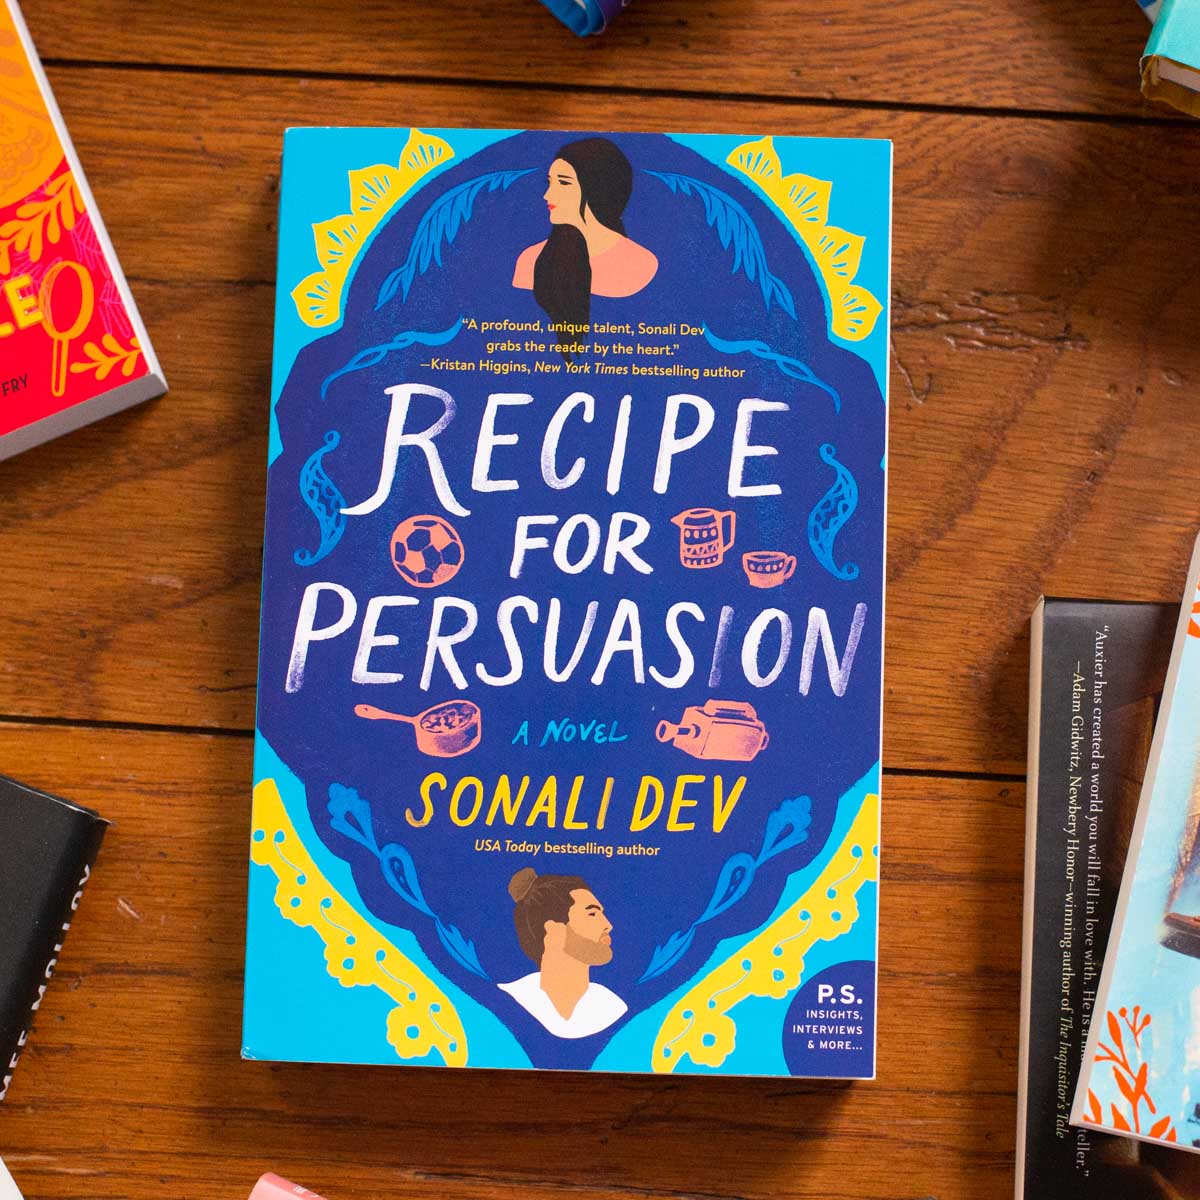 A copy of the book Recipe for Persuasion is on the table.